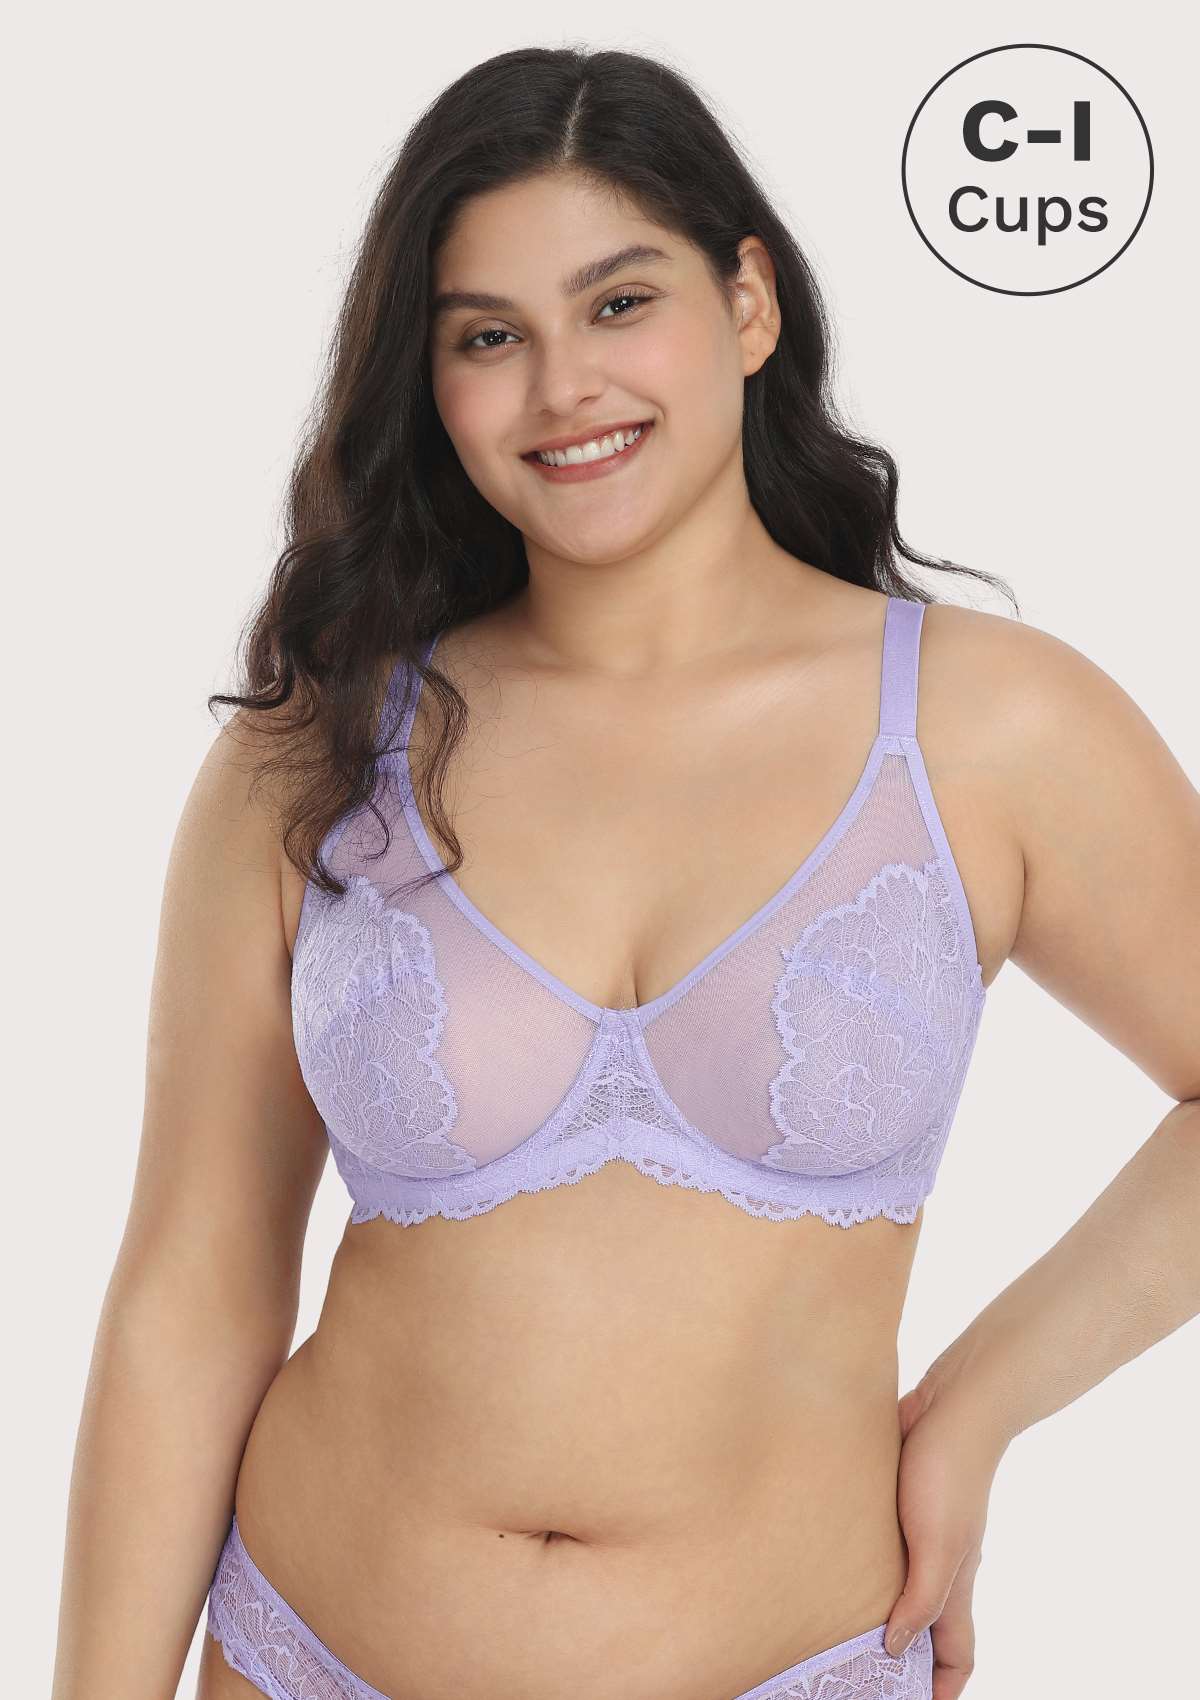 HSIA Blossom Transparent Lace Bra: Plus Size Wired Back Smoothing Bra - Light Purple / 44 / C